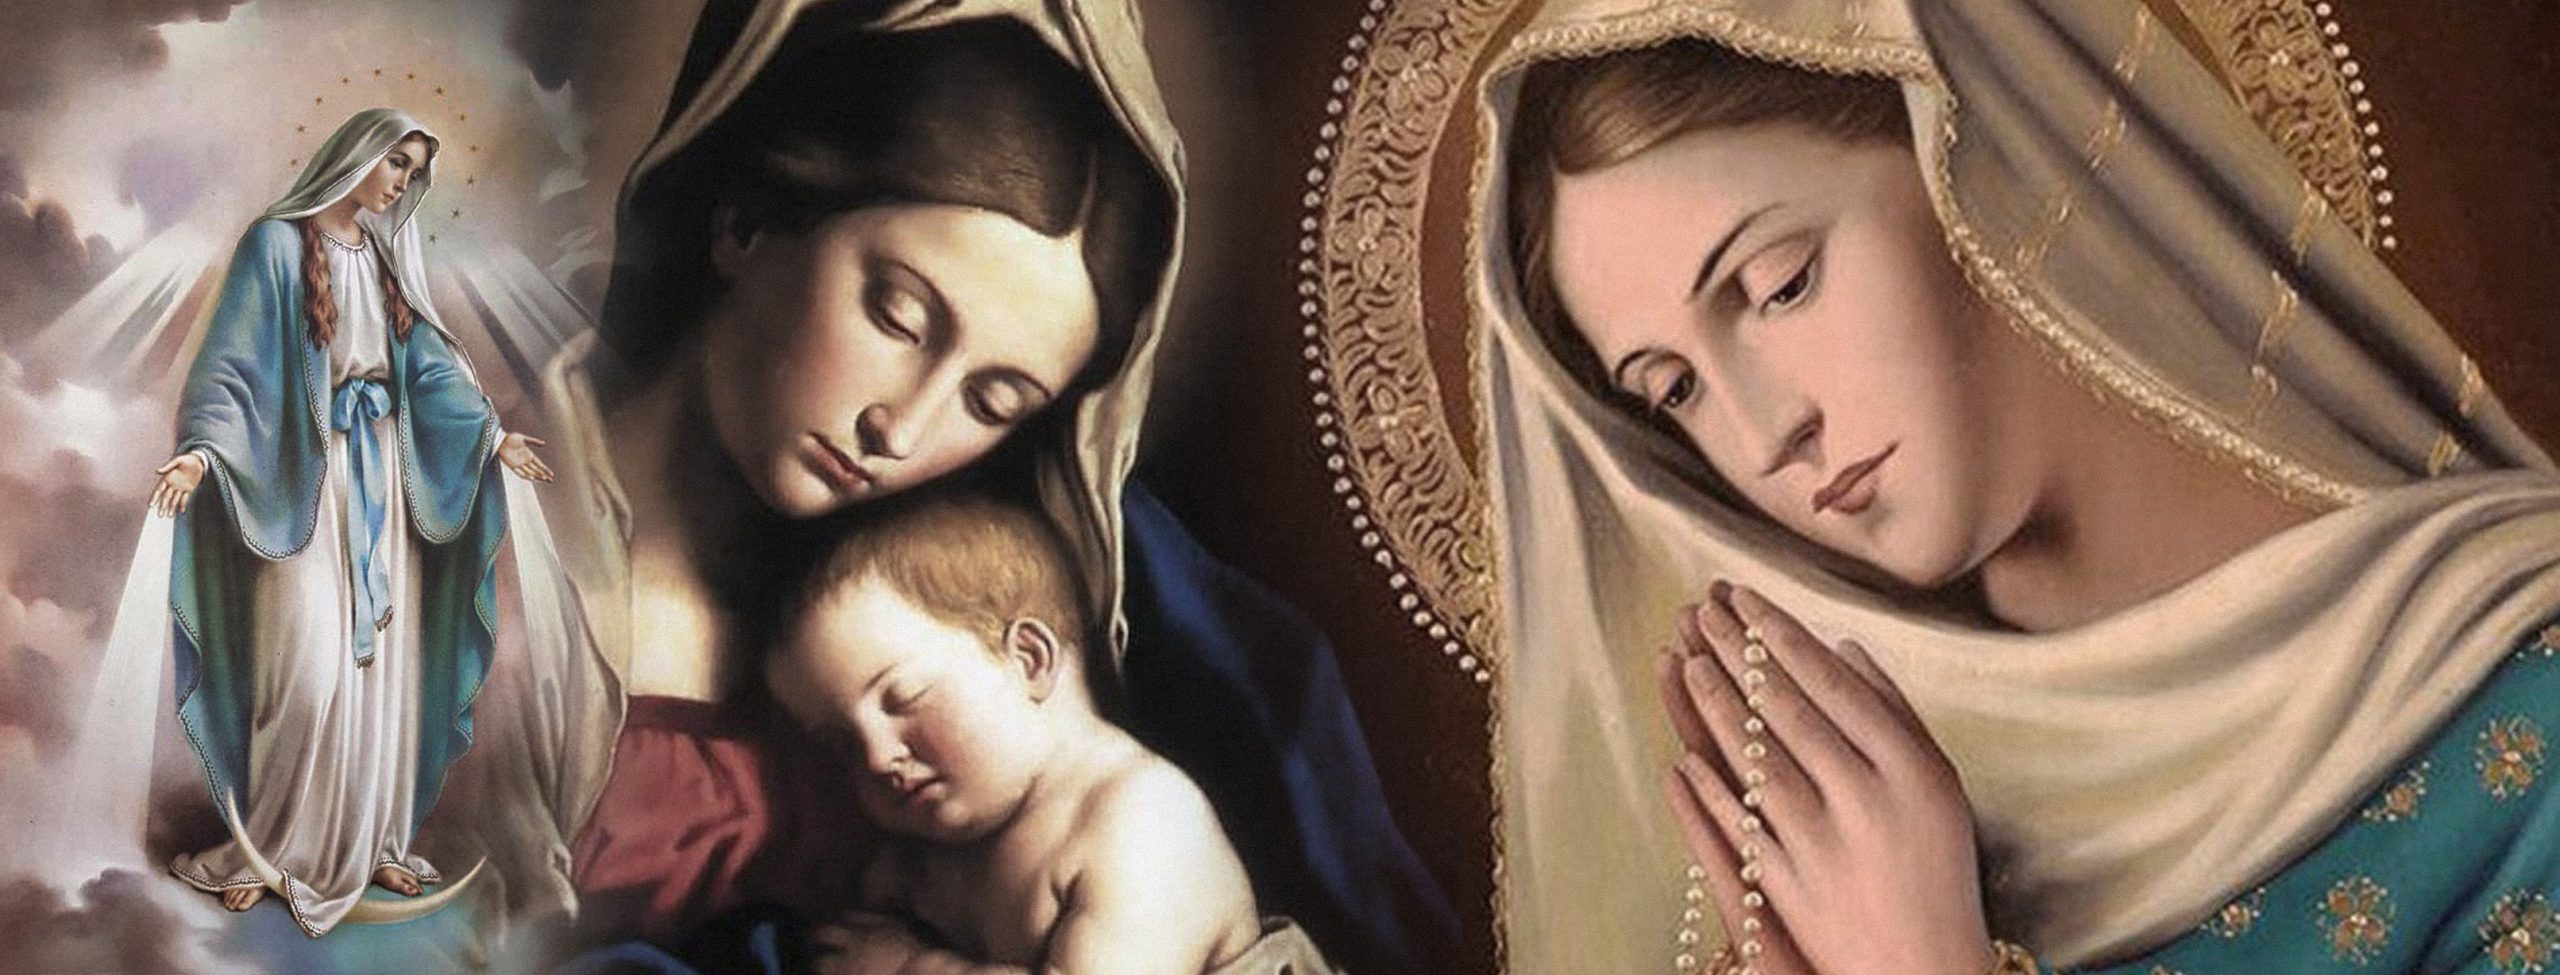 symbols of mary mother of god